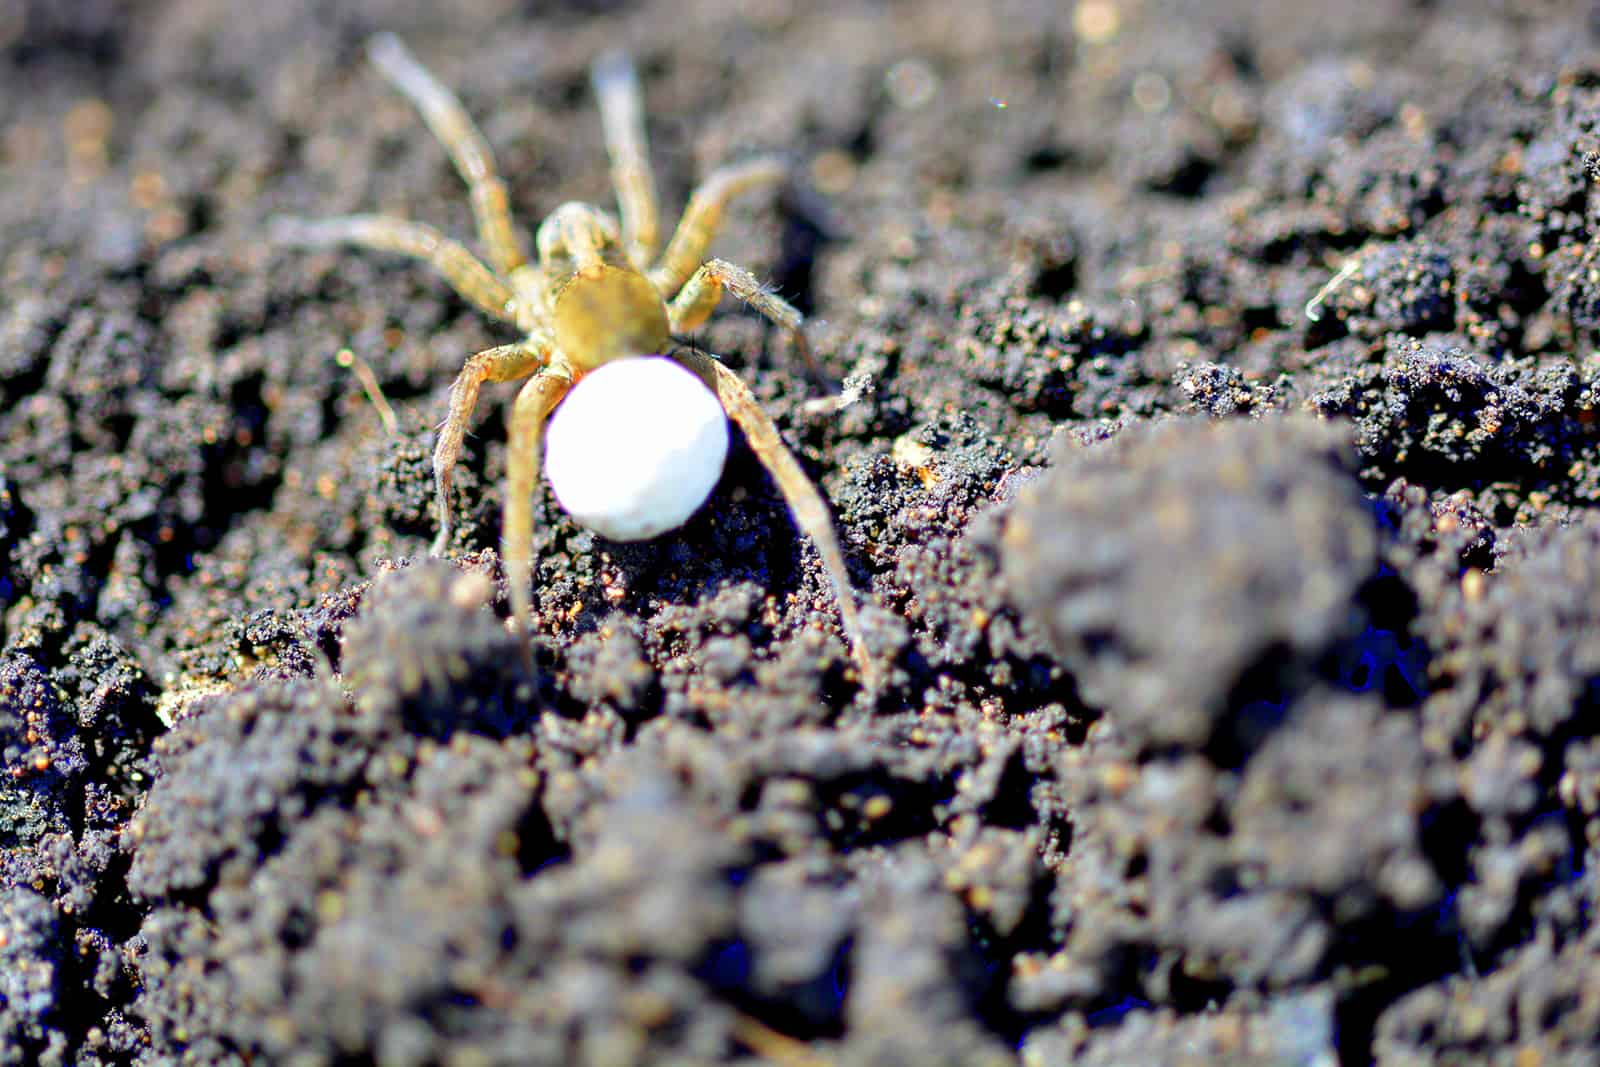 10 Methods To Deal With Spider Eggs In Plant Soil Effectively